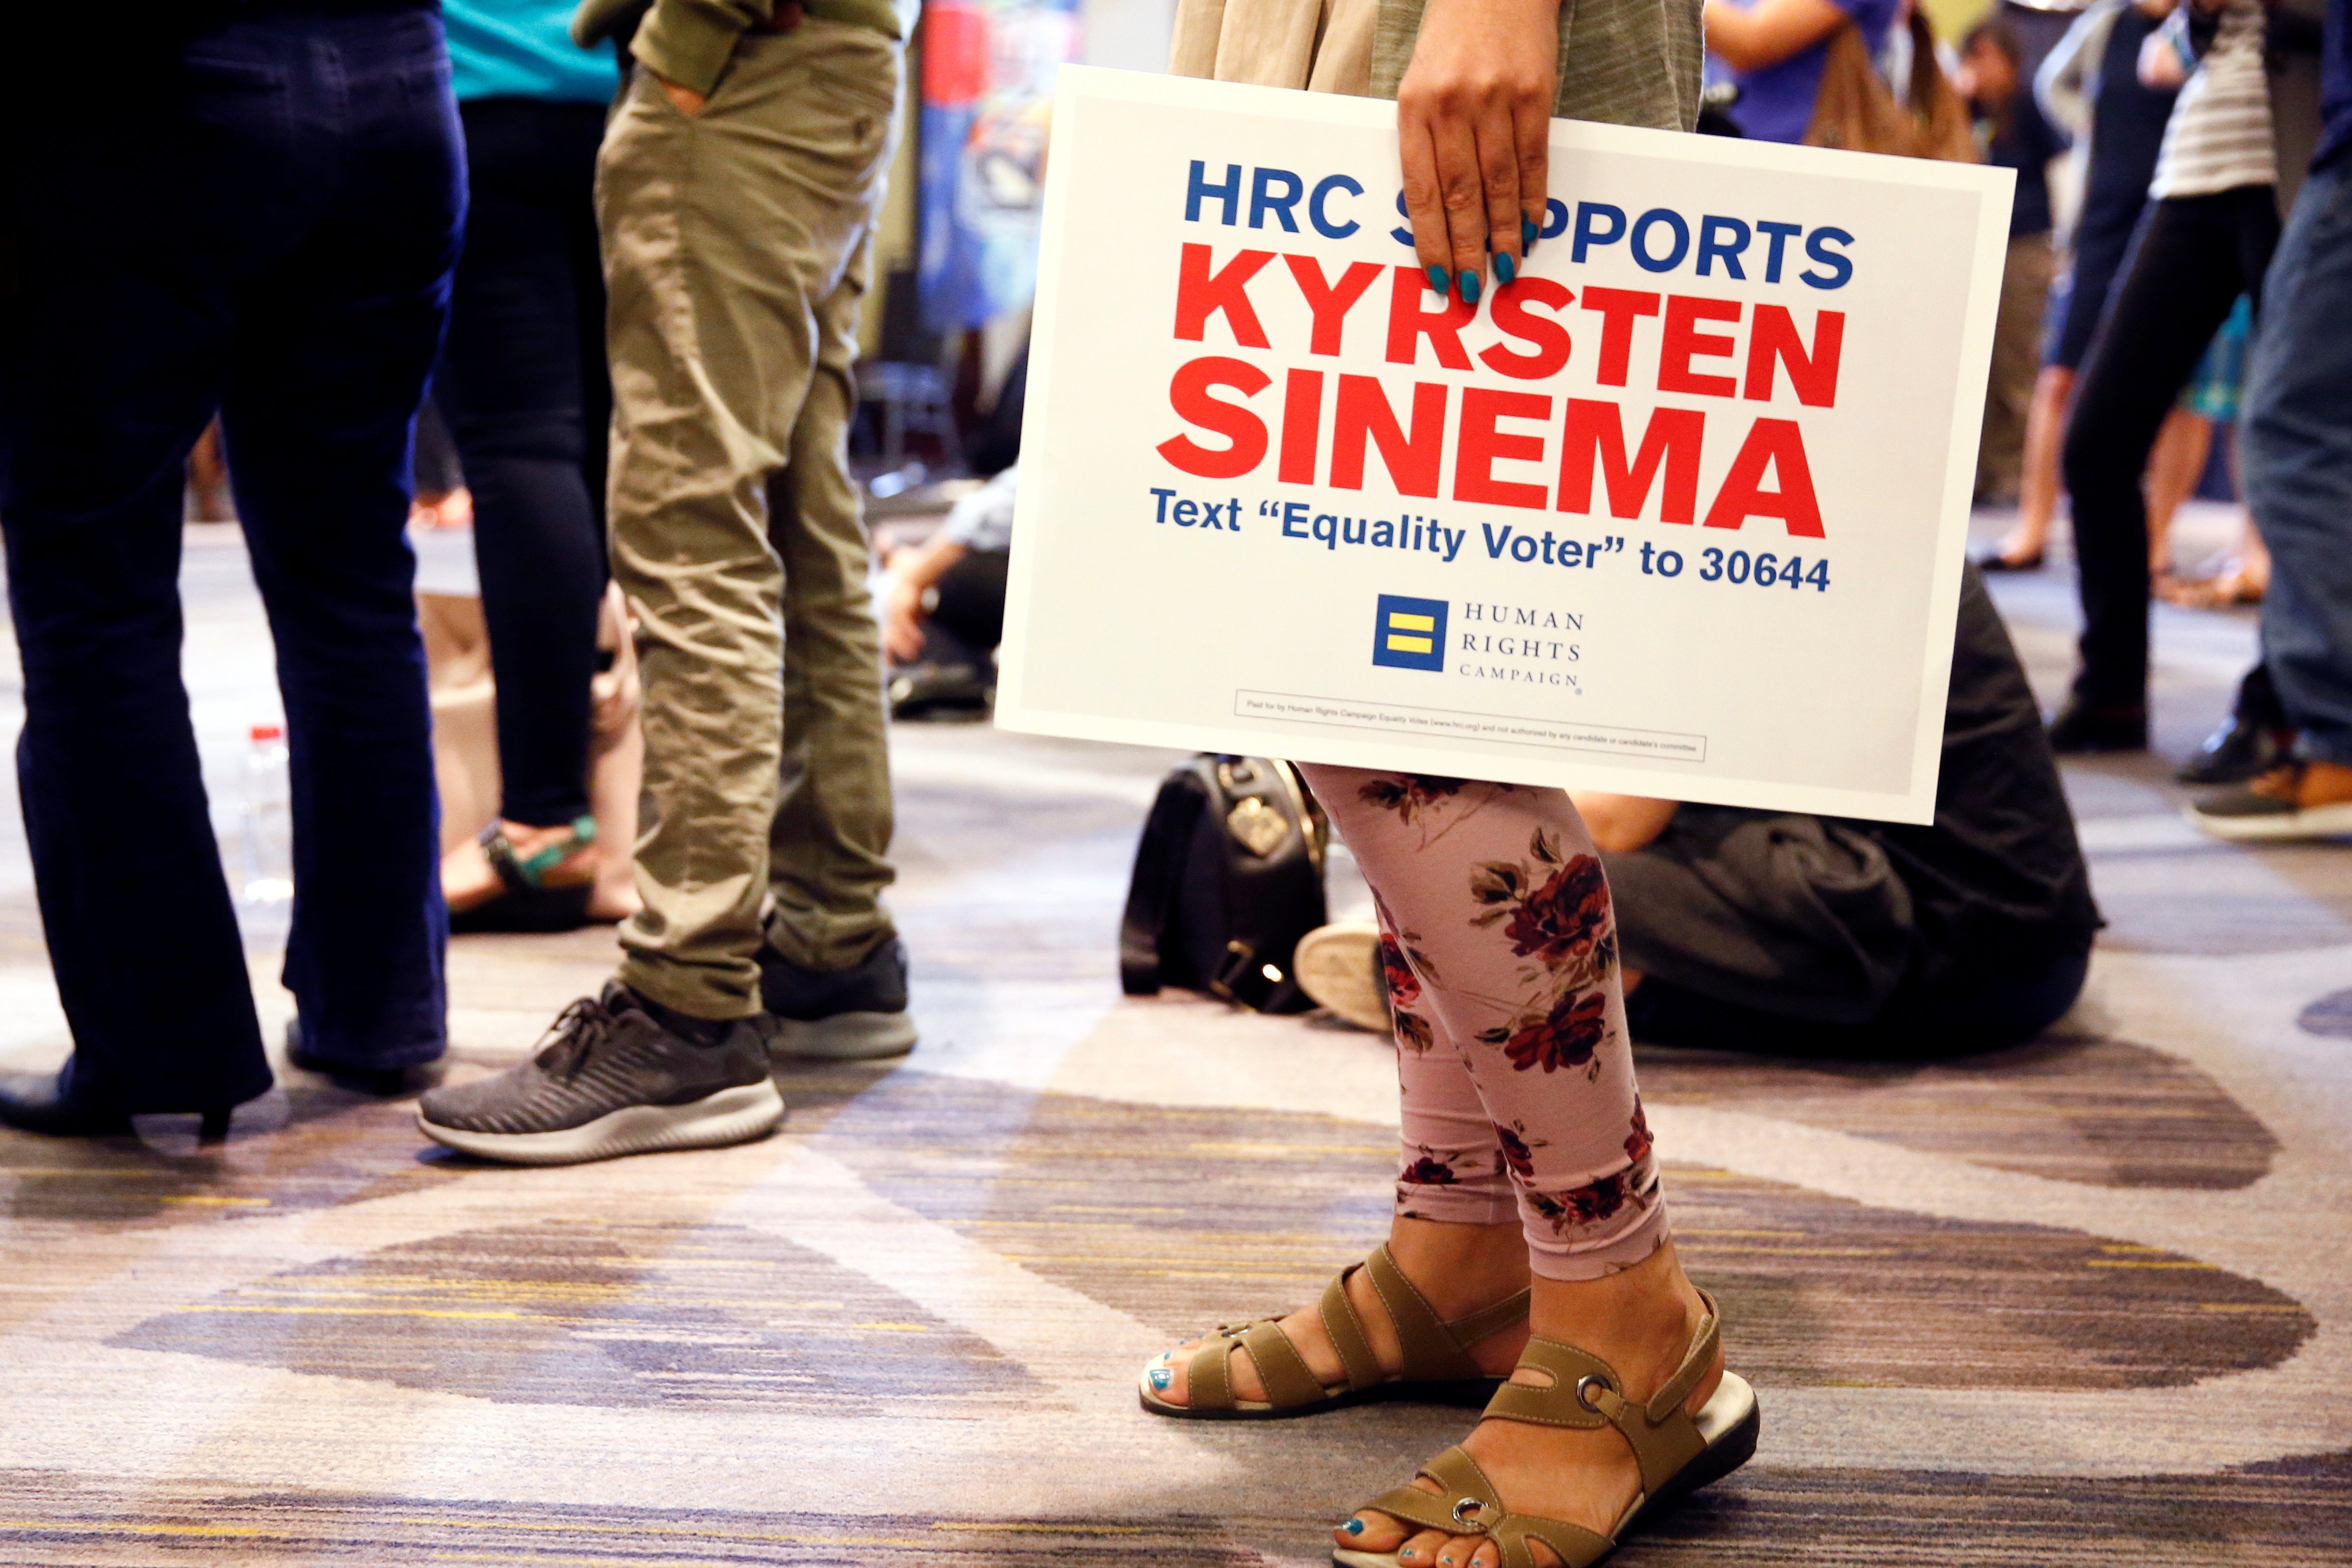 A supporter holds a sign for Kyrsten Sinema at the Arizona Democratic Party Election Night Party in Phoenix, Arizona, U.S. November 6, 2018. 